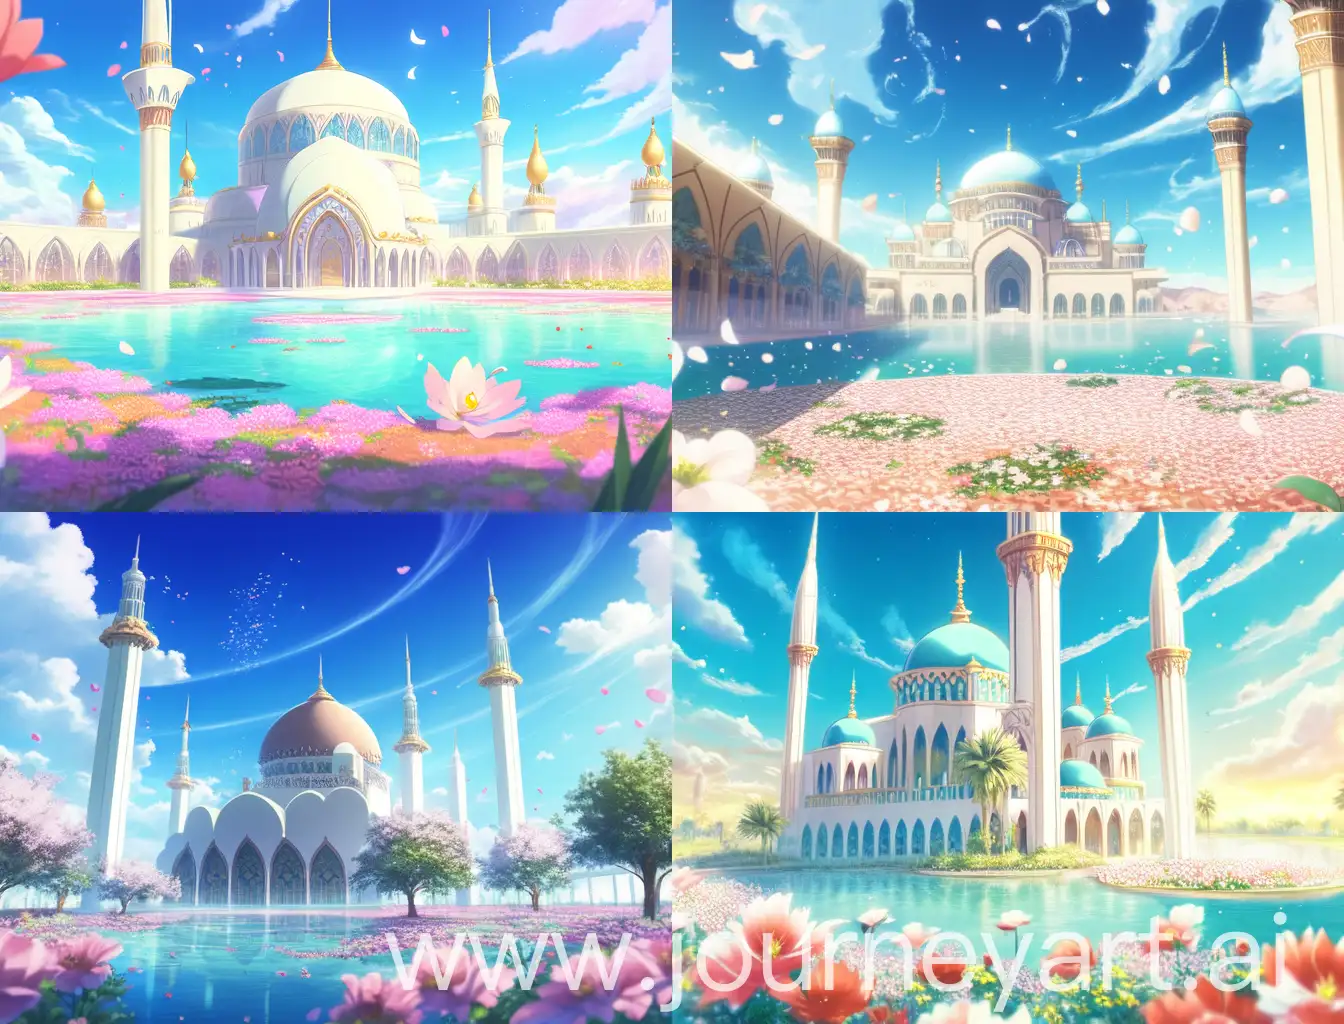 Makoto shinkai style, oasis, palm, sand, arabian style, colorful petals, lily pad, flower beside Oasis, glistening sunlight, Arabian mosque, blue sky, clouds, beautiful fantasy Arabian oasis , Egyptian mosque, butterfly, ultra hd, high quality, anime style.